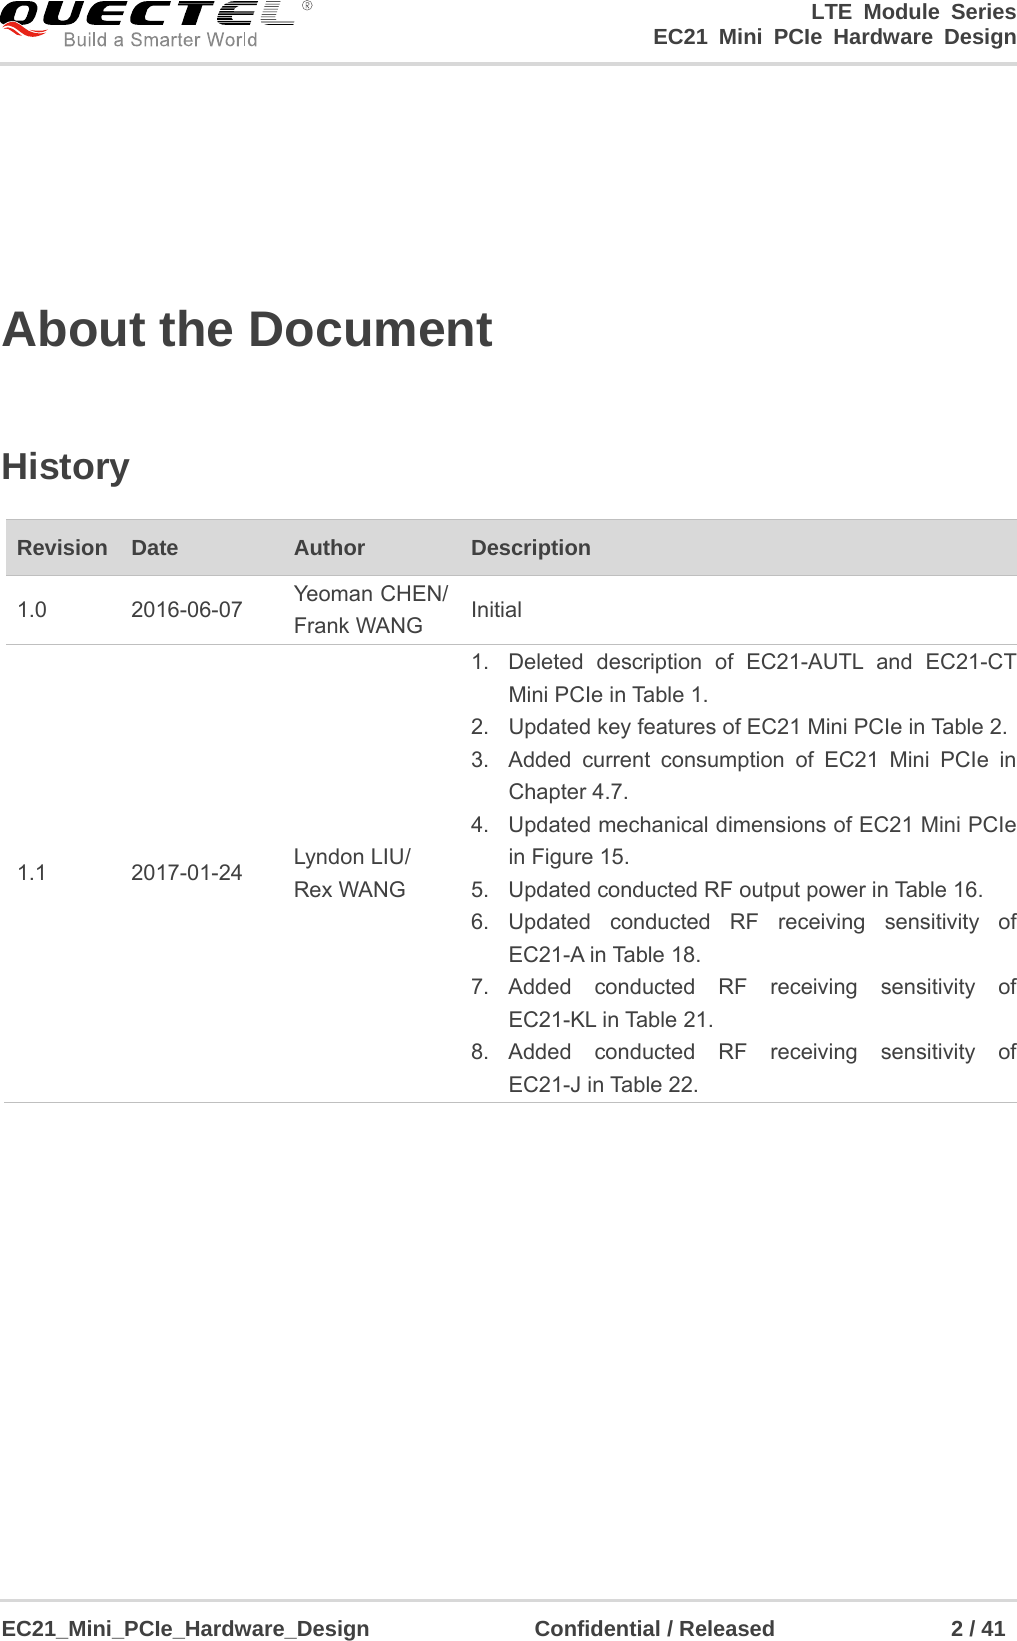                                                                        LTE Module Series                                                            EC21 Mini PCIe Hardware Design  EC21_Mini_PCIe_Hardware_Design               Confidential / Released                2 / 41    About the Document   History  Revision  Date  Author  Description 1.0 2016-06-07 Yeoman CHEN/ Frank WANG  Initial 1.1 2017-01-24 Lyndon LIU/ Rex WANG 1.  Deleted description of EC21-AUTL and EC21-CT Mini PCIe in Table 1. 2.  Updated key features of EC21 Mini PCIe in Table 2. 3.  Added current consumption of EC21 Mini PCIe in Chapter 4.7. 4.  Updated mechanical dimensions of EC21 Mini PCIe in Figure 15. 5.  Updated conducted RF output power in Table 16. 6. Updated conducted RF receiving sensitivity of EC21-A in Table 18. 7. Added conducted RF receiving sensitivity of  EC21-KL in Table 21. 8. Added conducted RF receiving sensitivity of  EC21-J in Table 22. 